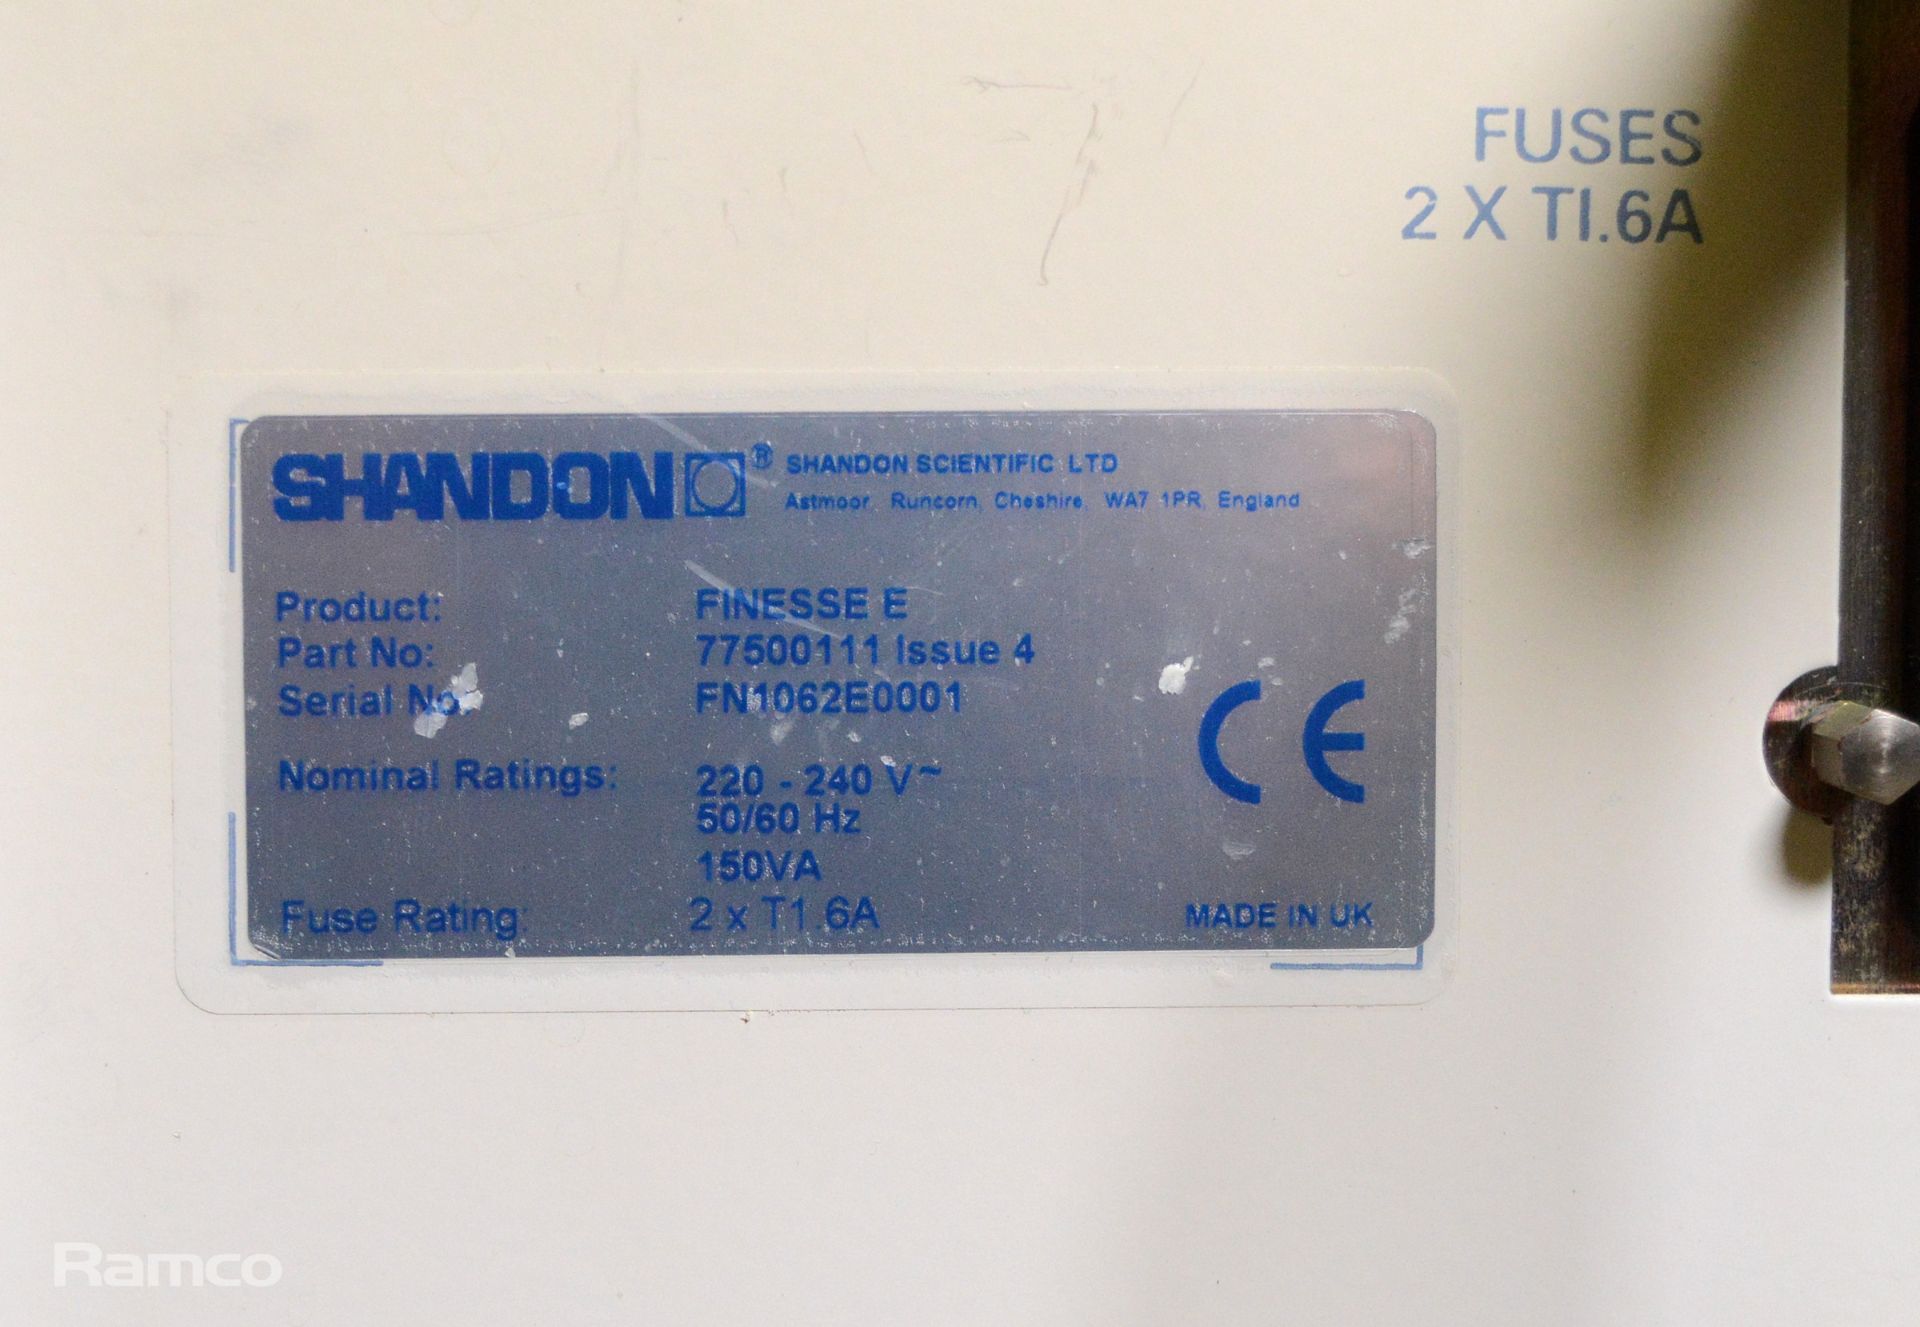 Thermo scientific Shandon finesse E microtome 220/240V - Part number 77500111 (Issue 4) - Image 8 of 9